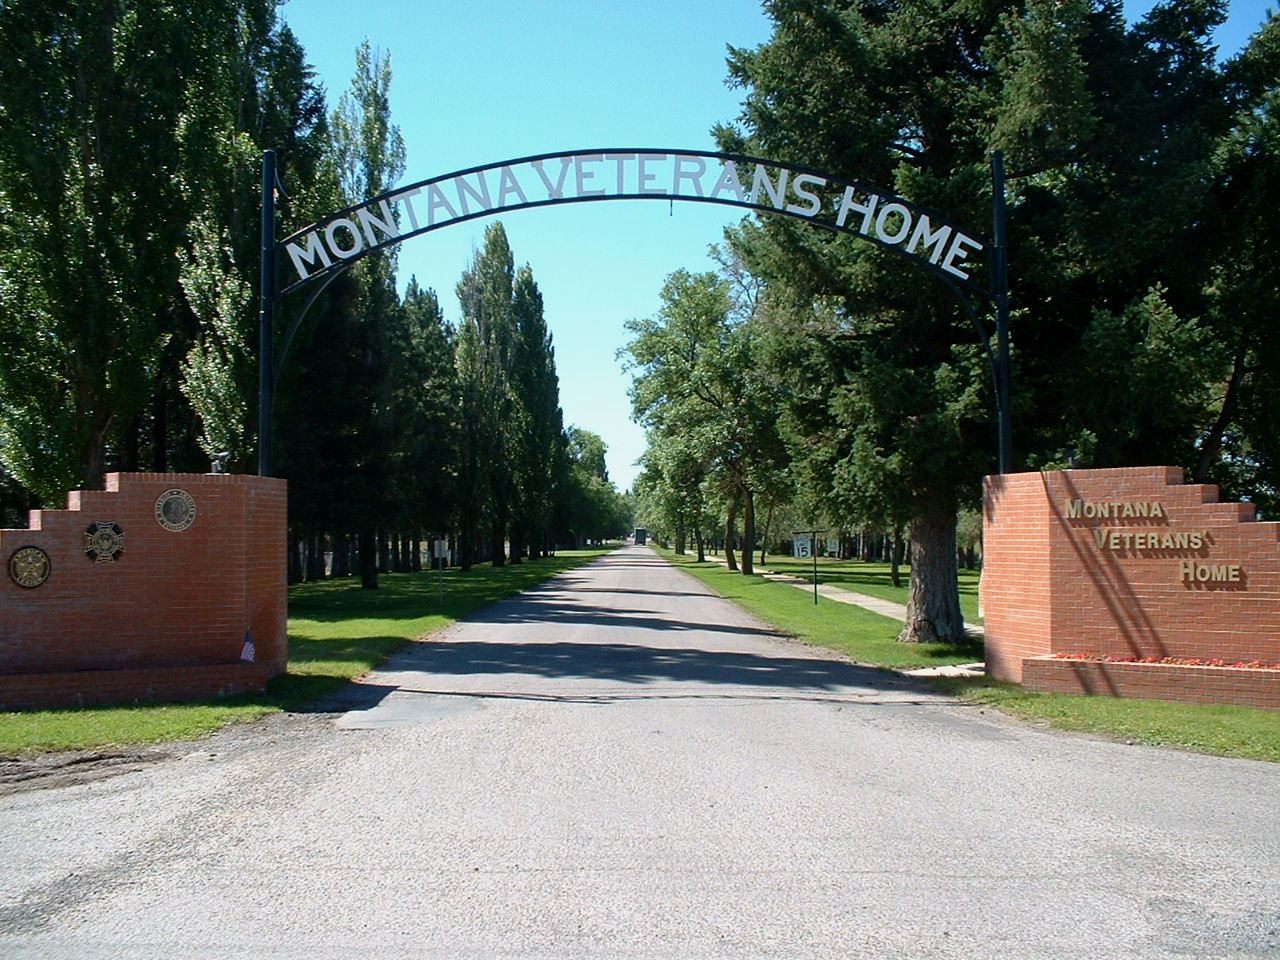 A picture of the gate outside of the Montana Veterans home. There is a road, an arch that says Montana Veterans Home, and trees.